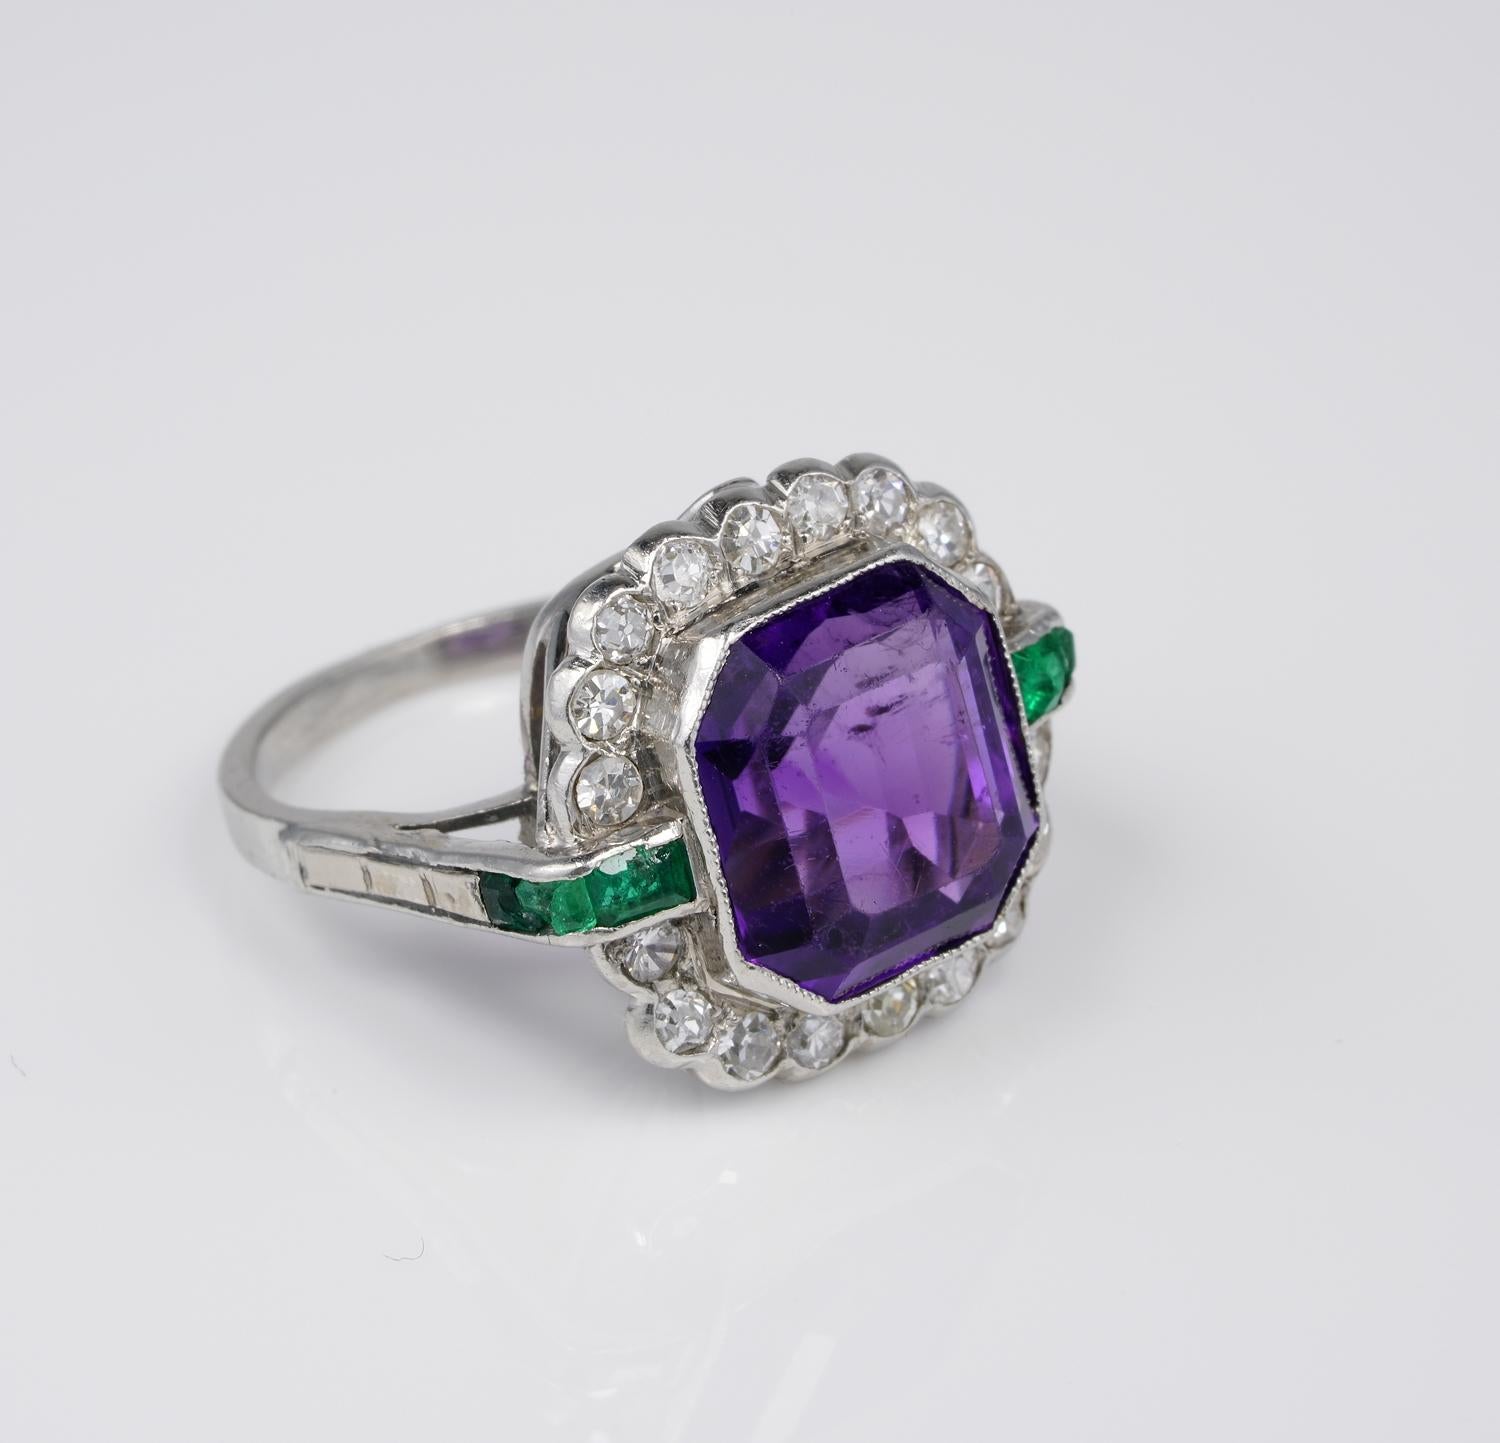 Journey to the 20's

Representative and highly distinctive Art Deco era, Amethyst, Diamond, Emerald ring
Divine right hand example so hard to come across these days
Charming and tasteful combination of colours between intense Purple, luscious